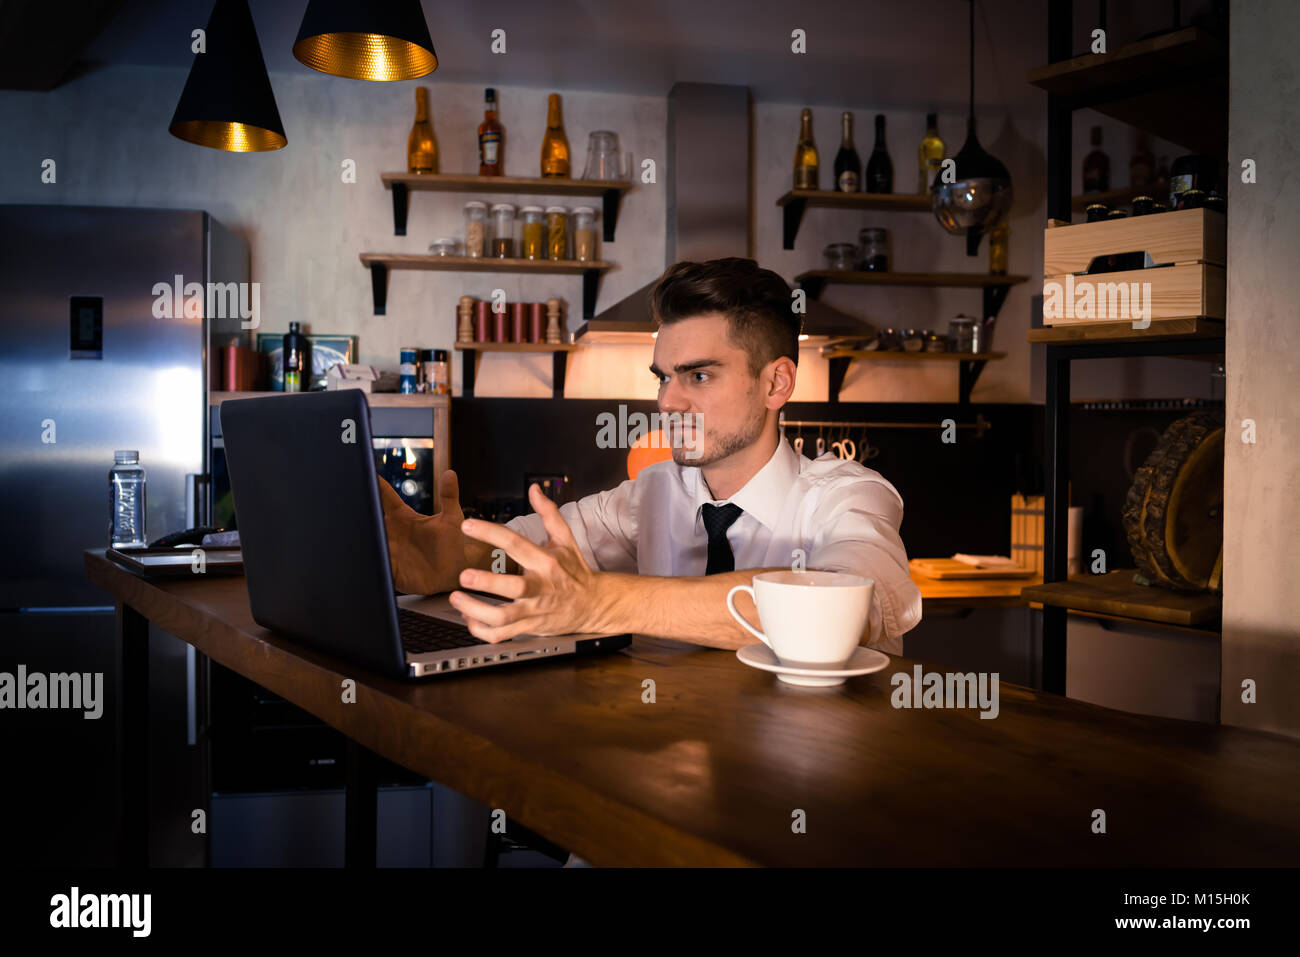 Dissatisfied young man sits in the kitchen at the bar counter and works in laptop. Home atmosphere, work in the evening with cup of coffee Stock Photo